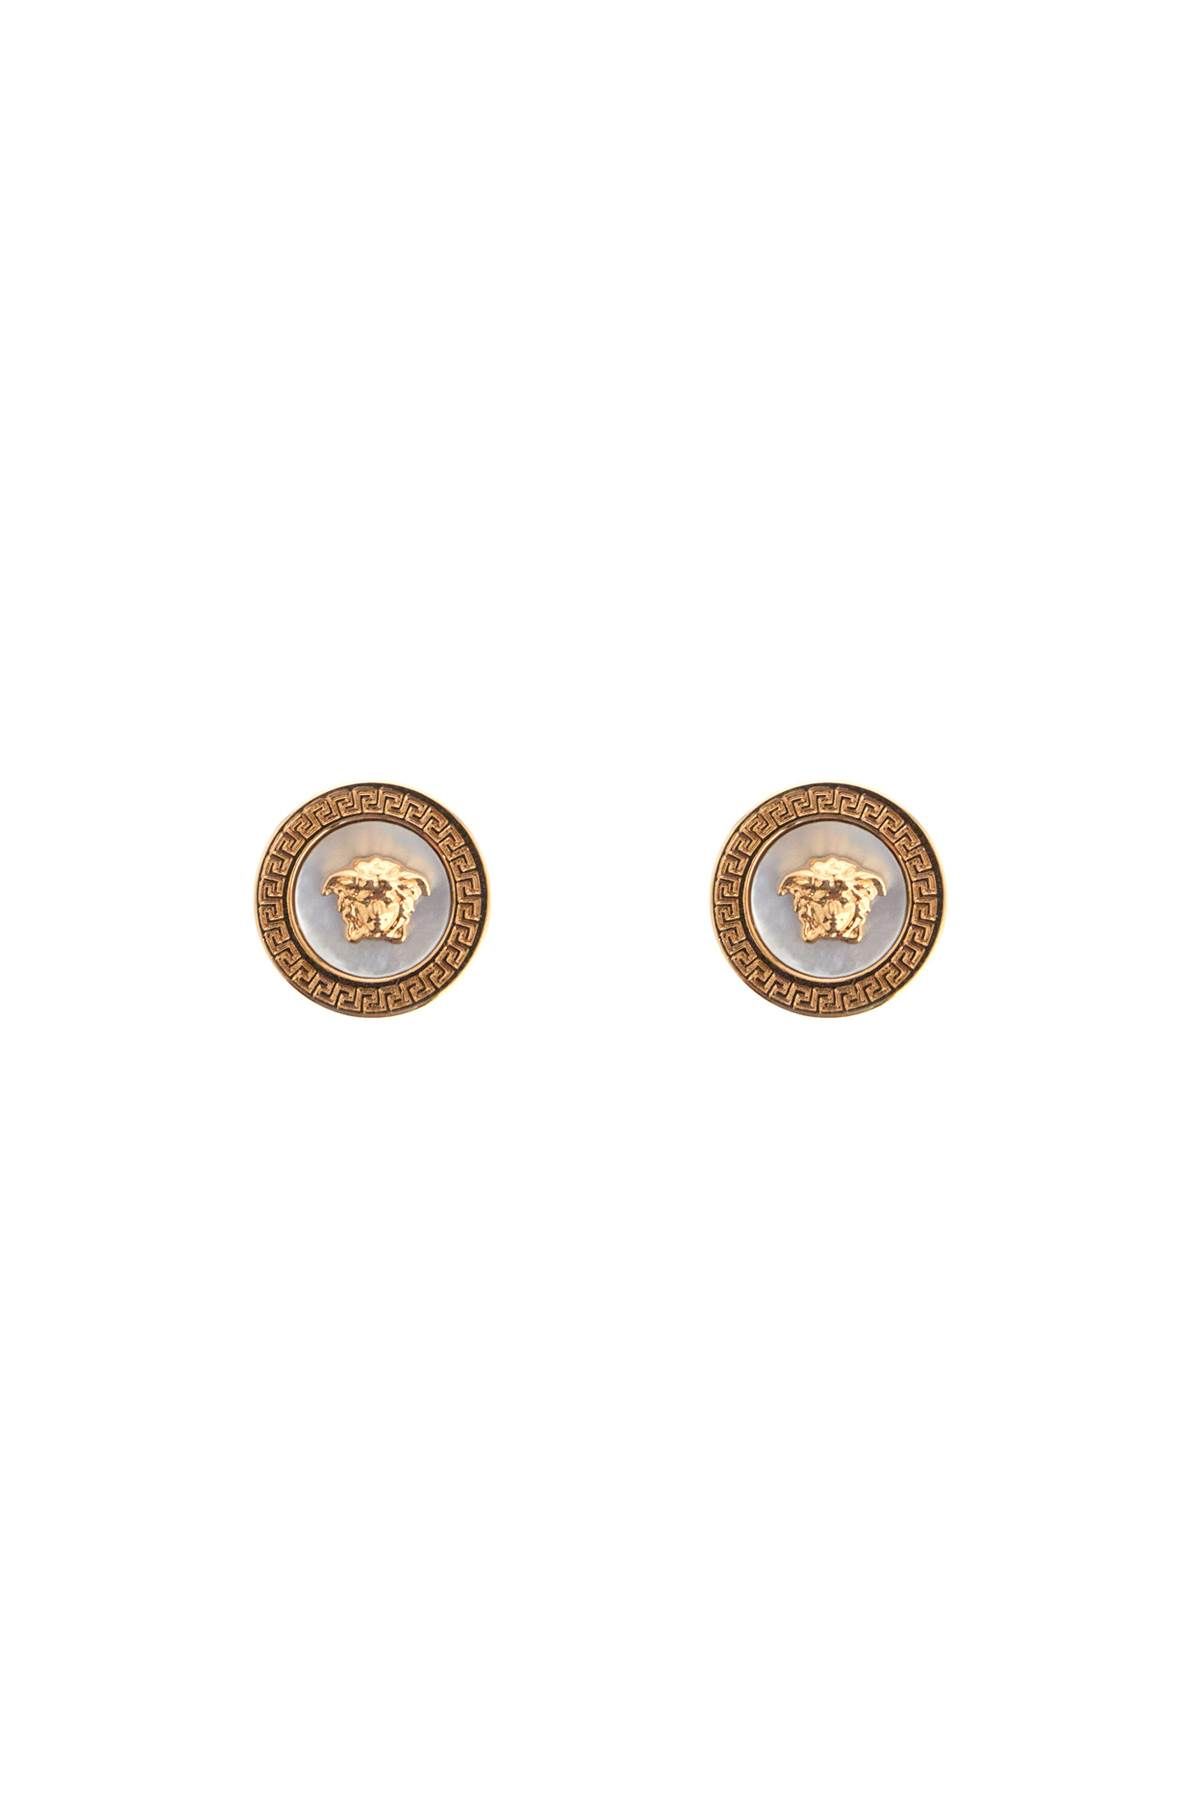 Versace VERSACE ic button earrings by orecch